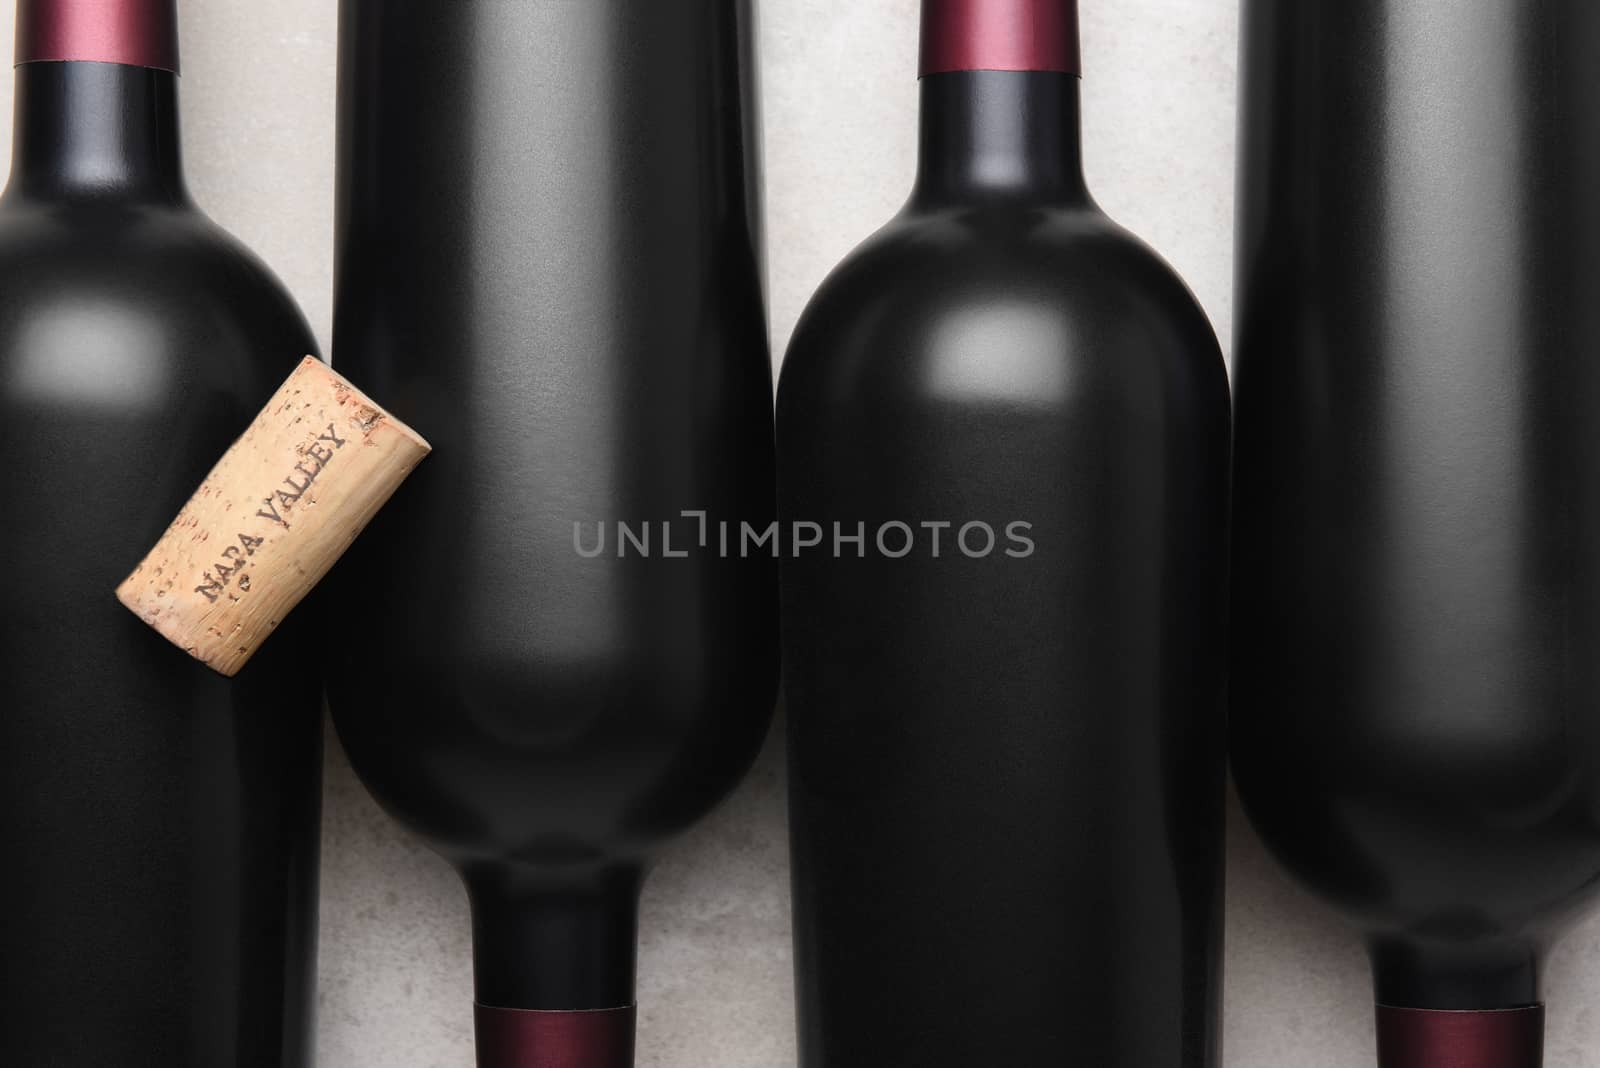 Napa Valley Cork: A wine cork on top of bottles of red wine.